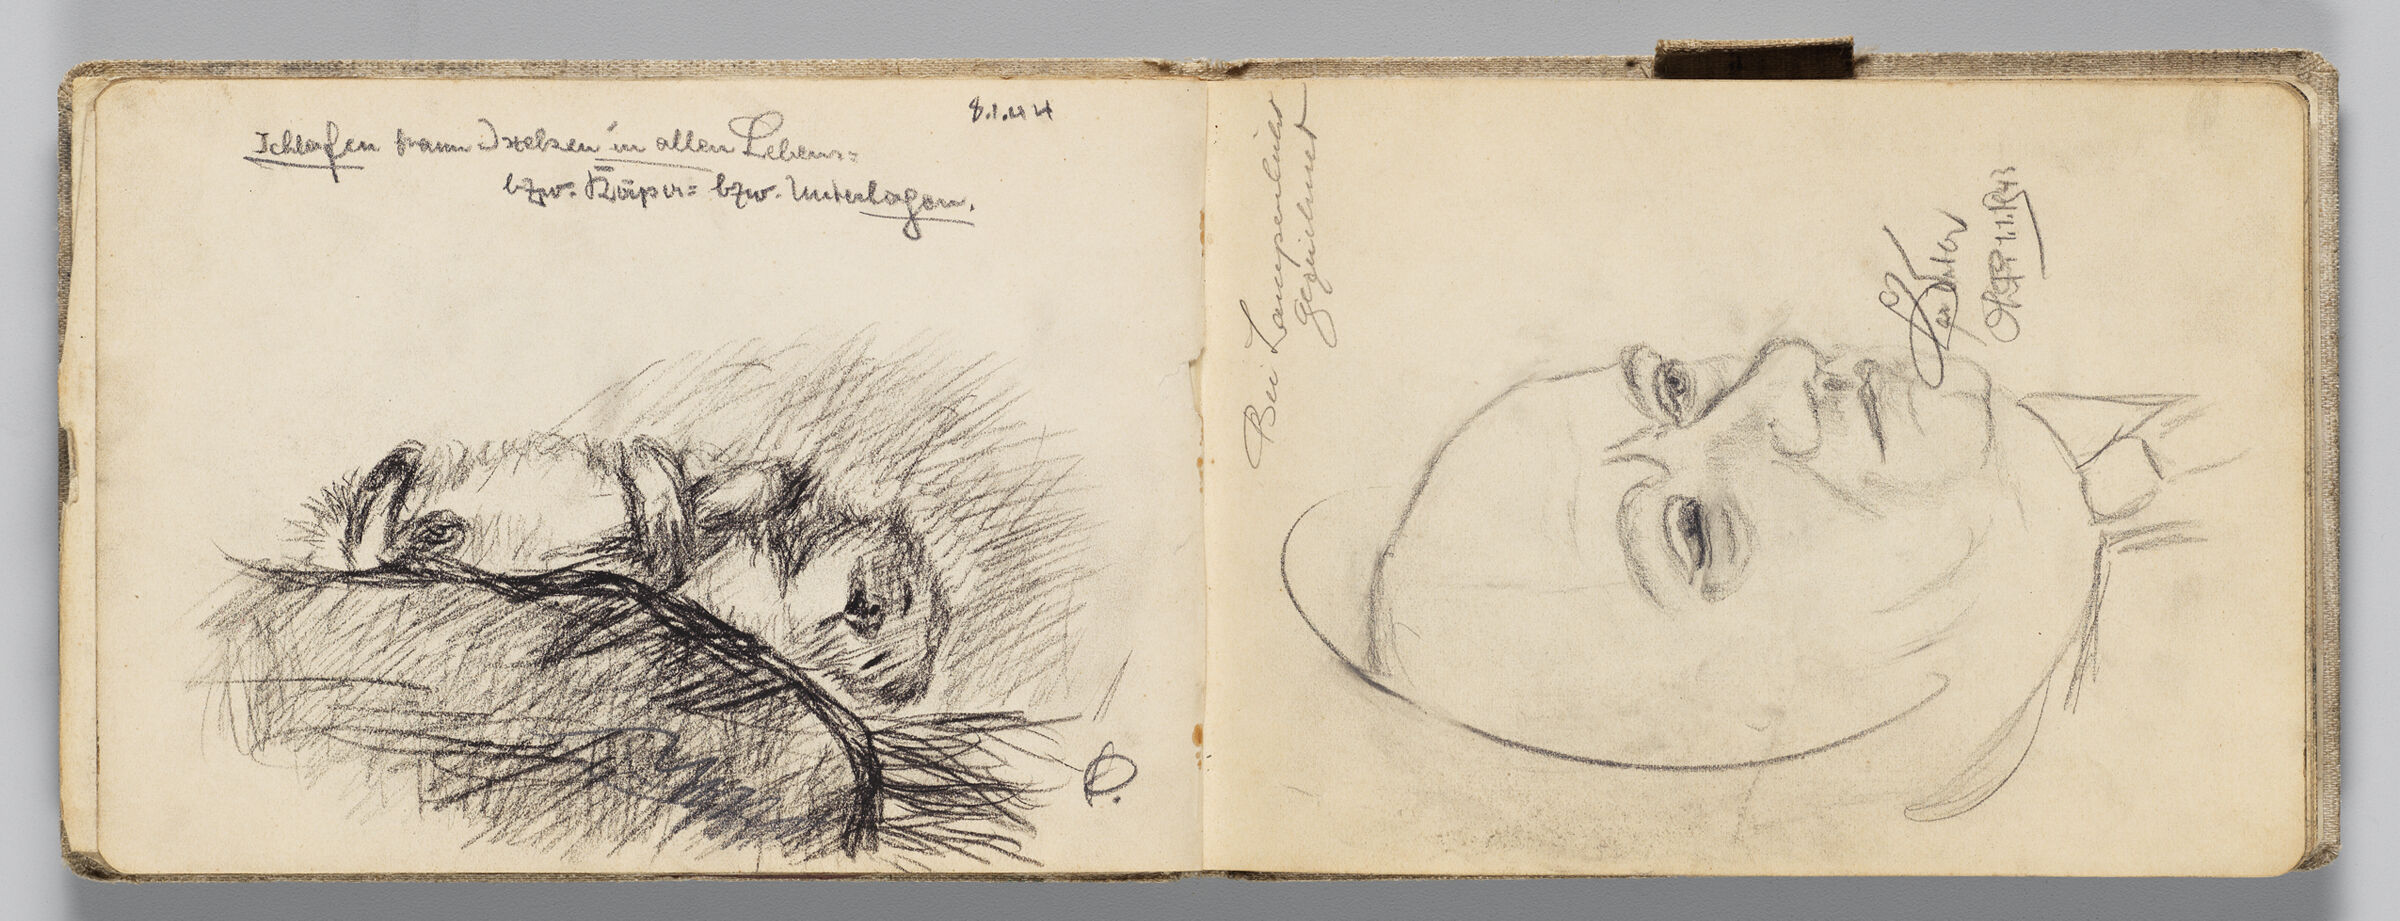 Untitled (Animal Sleeping, Left Page); Untitled (Portrait Of Male Figure, Right Page)